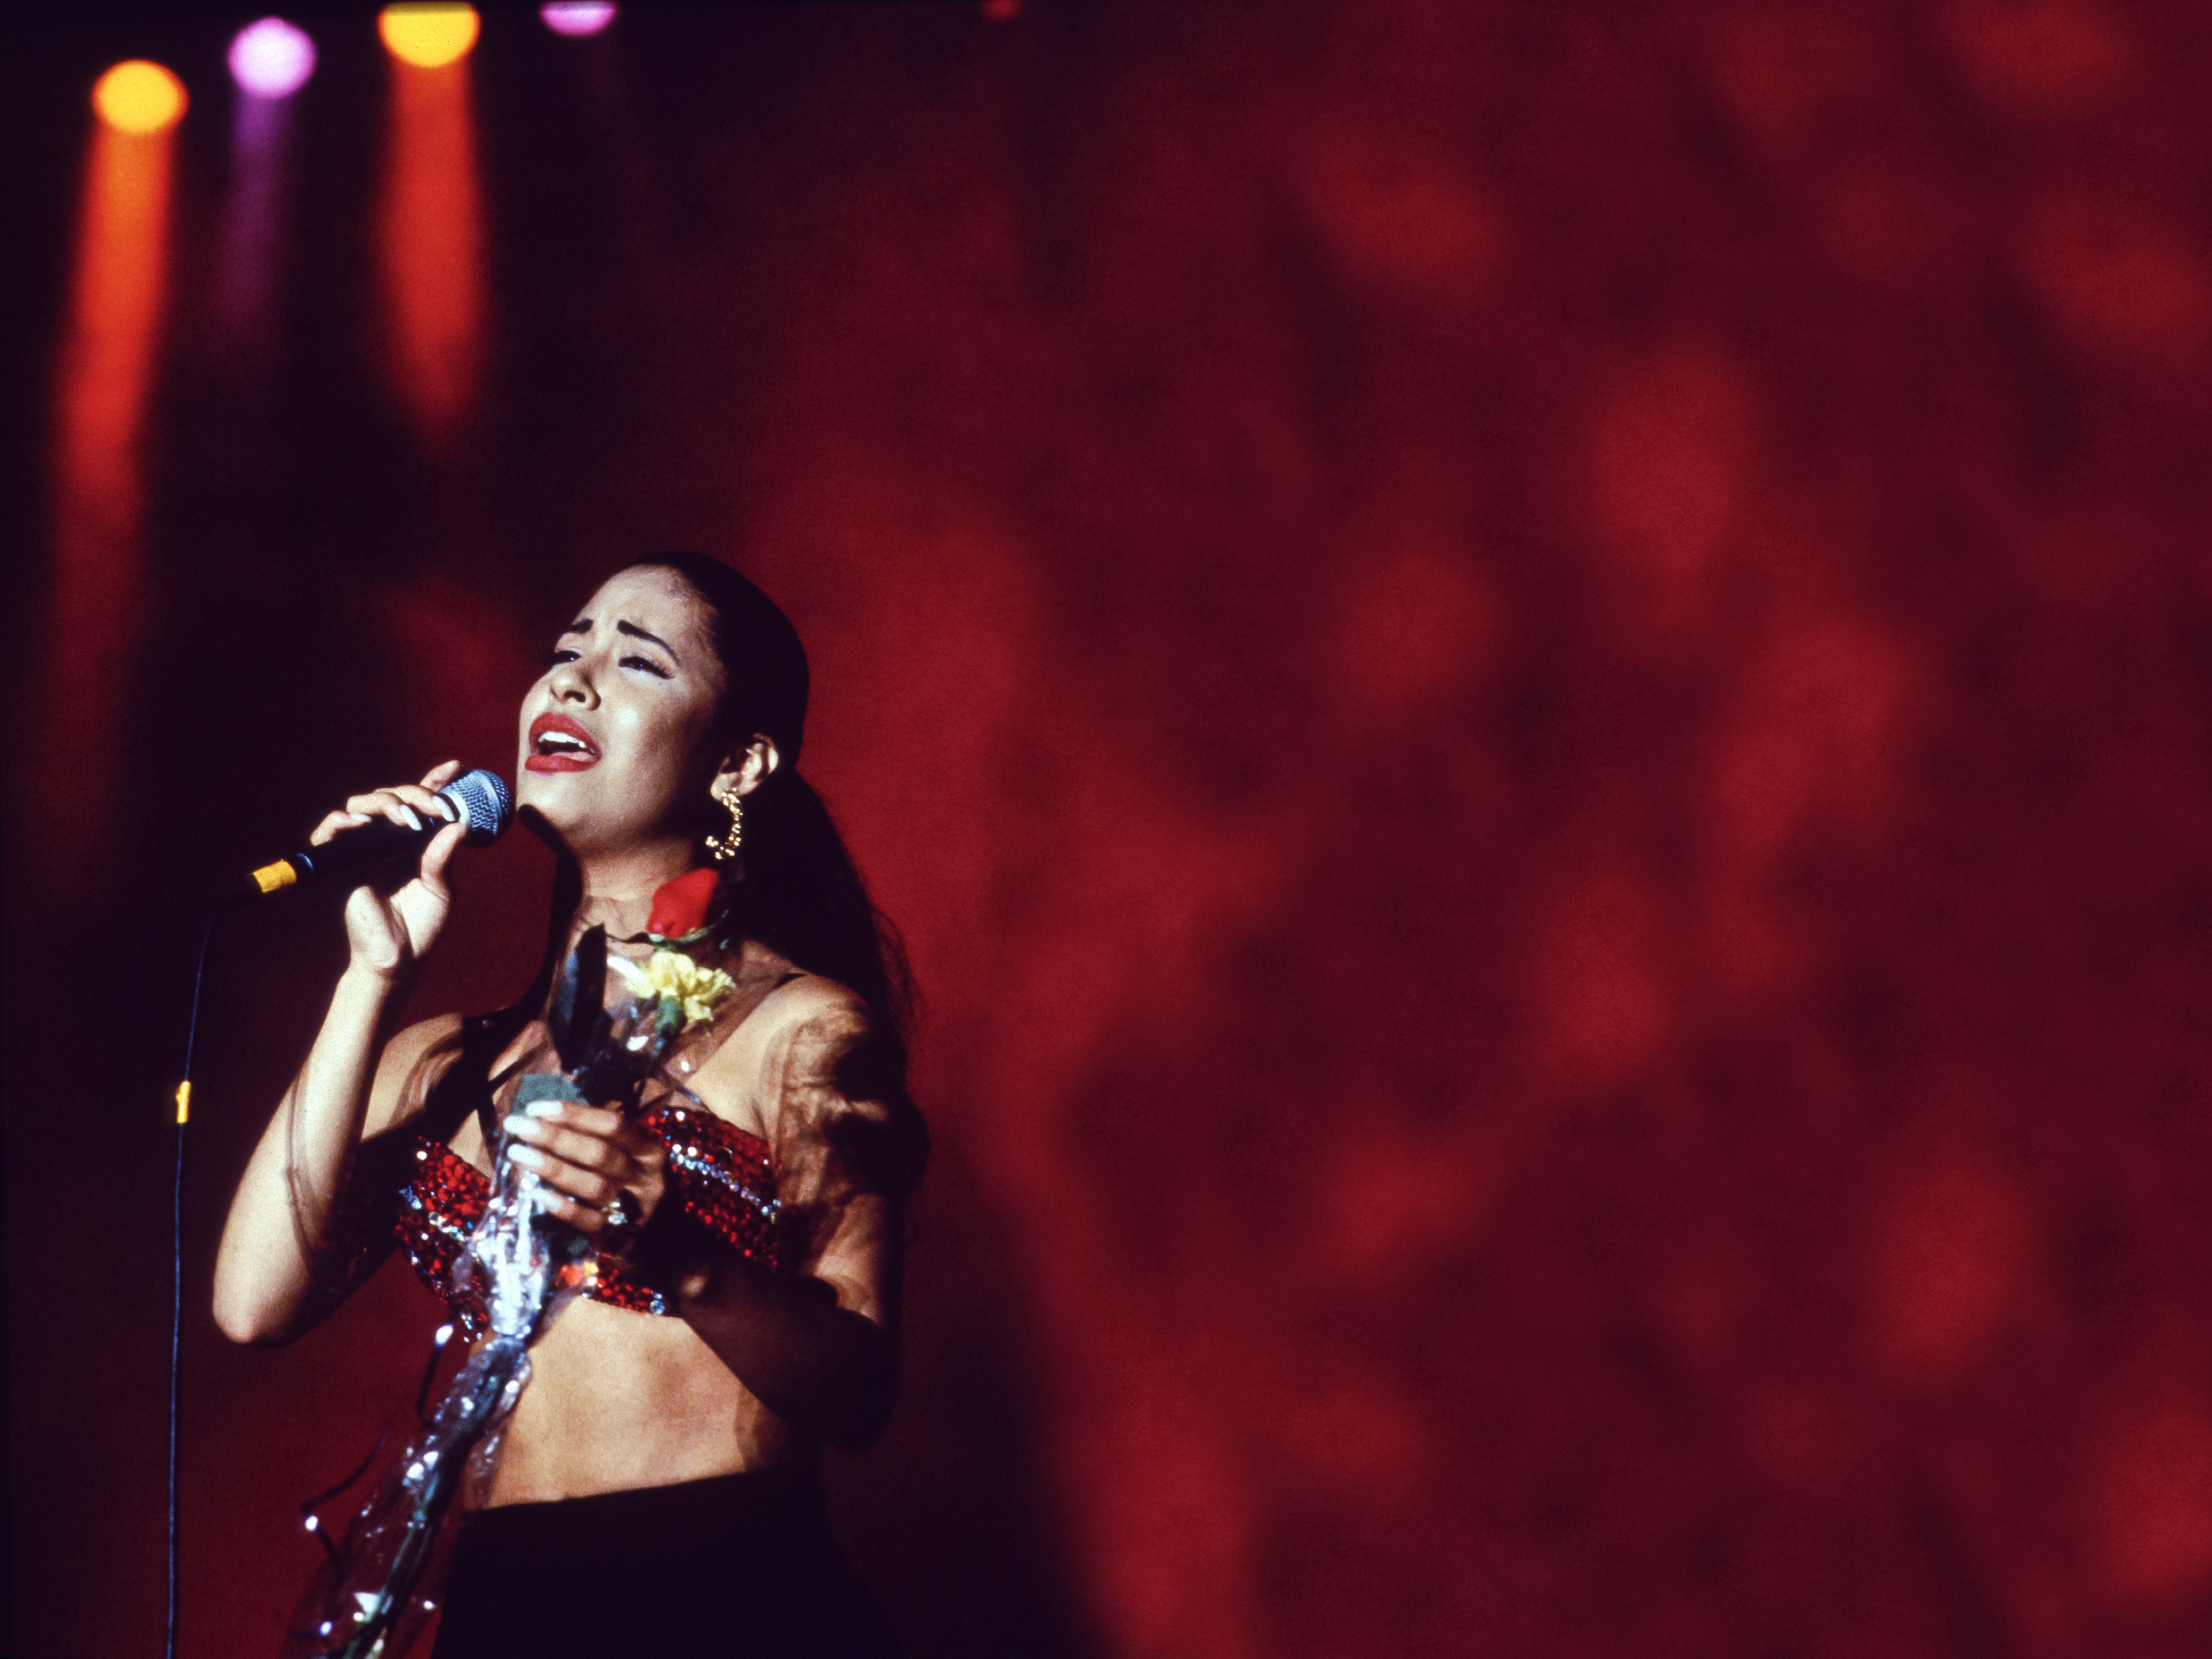 You Might Have Missed the Hidden Religious Message on Selena